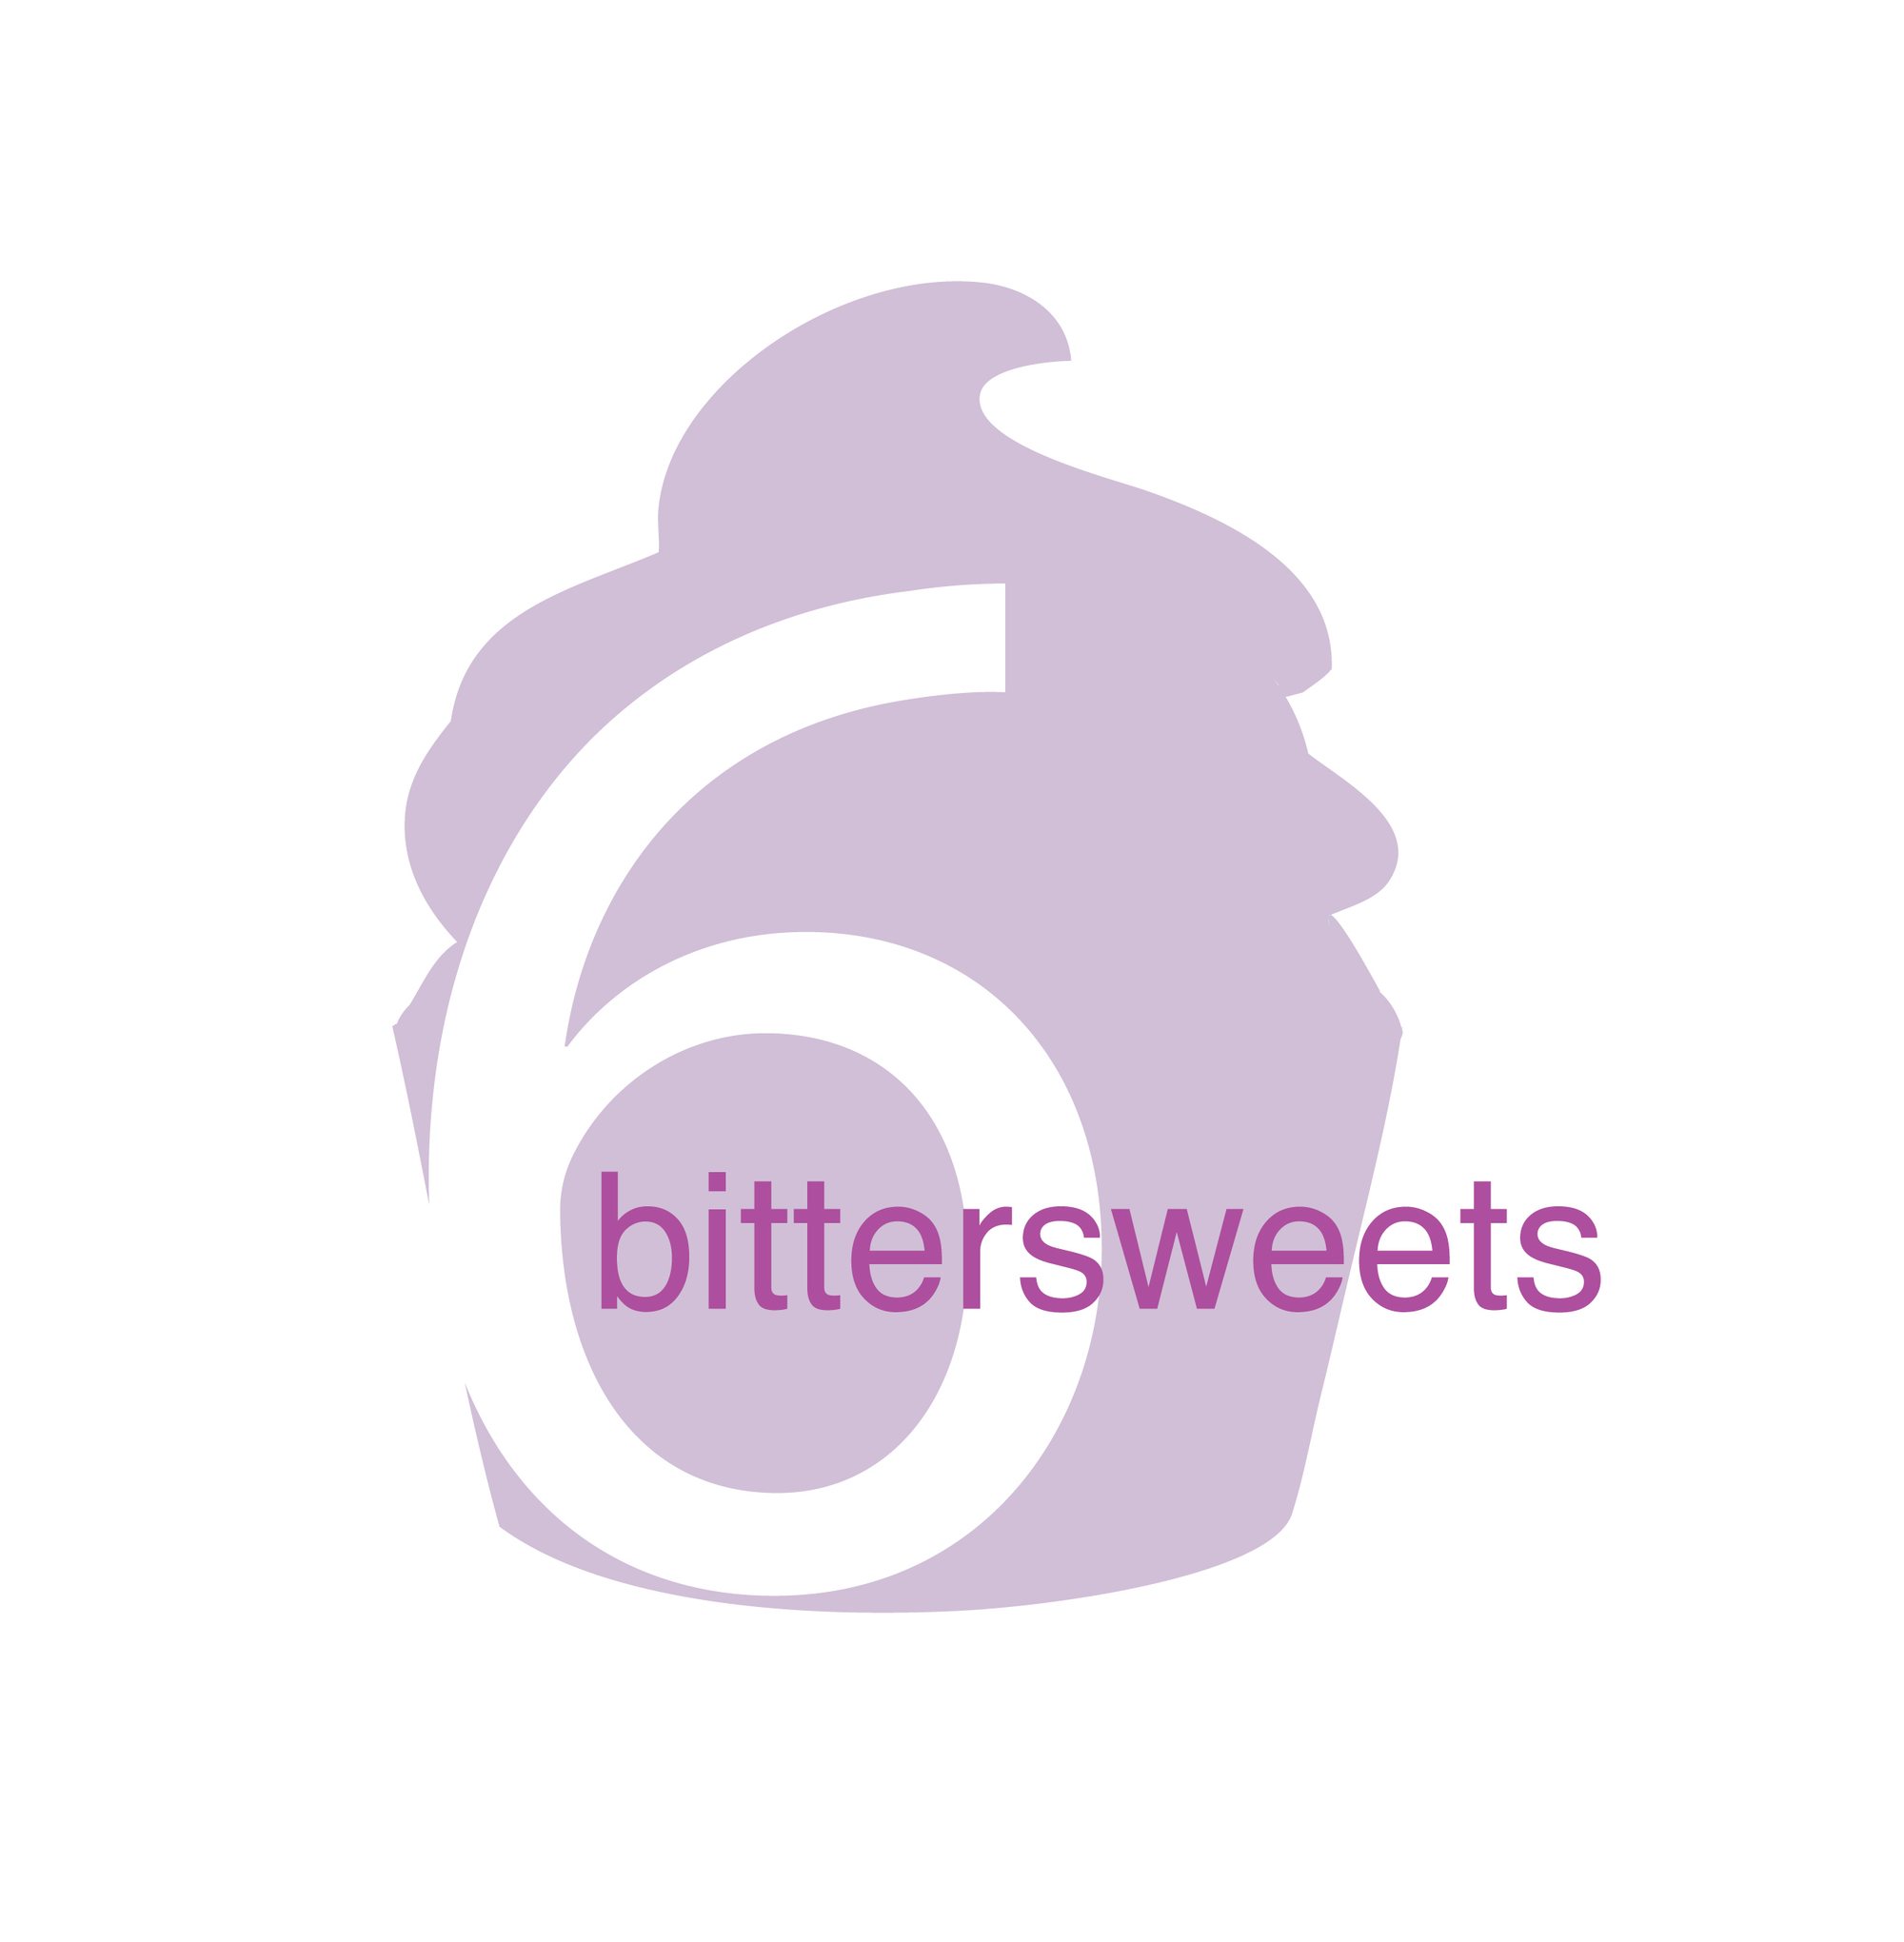 DIGITAL GIFT CARD For 6BittersweetsCutters Shop